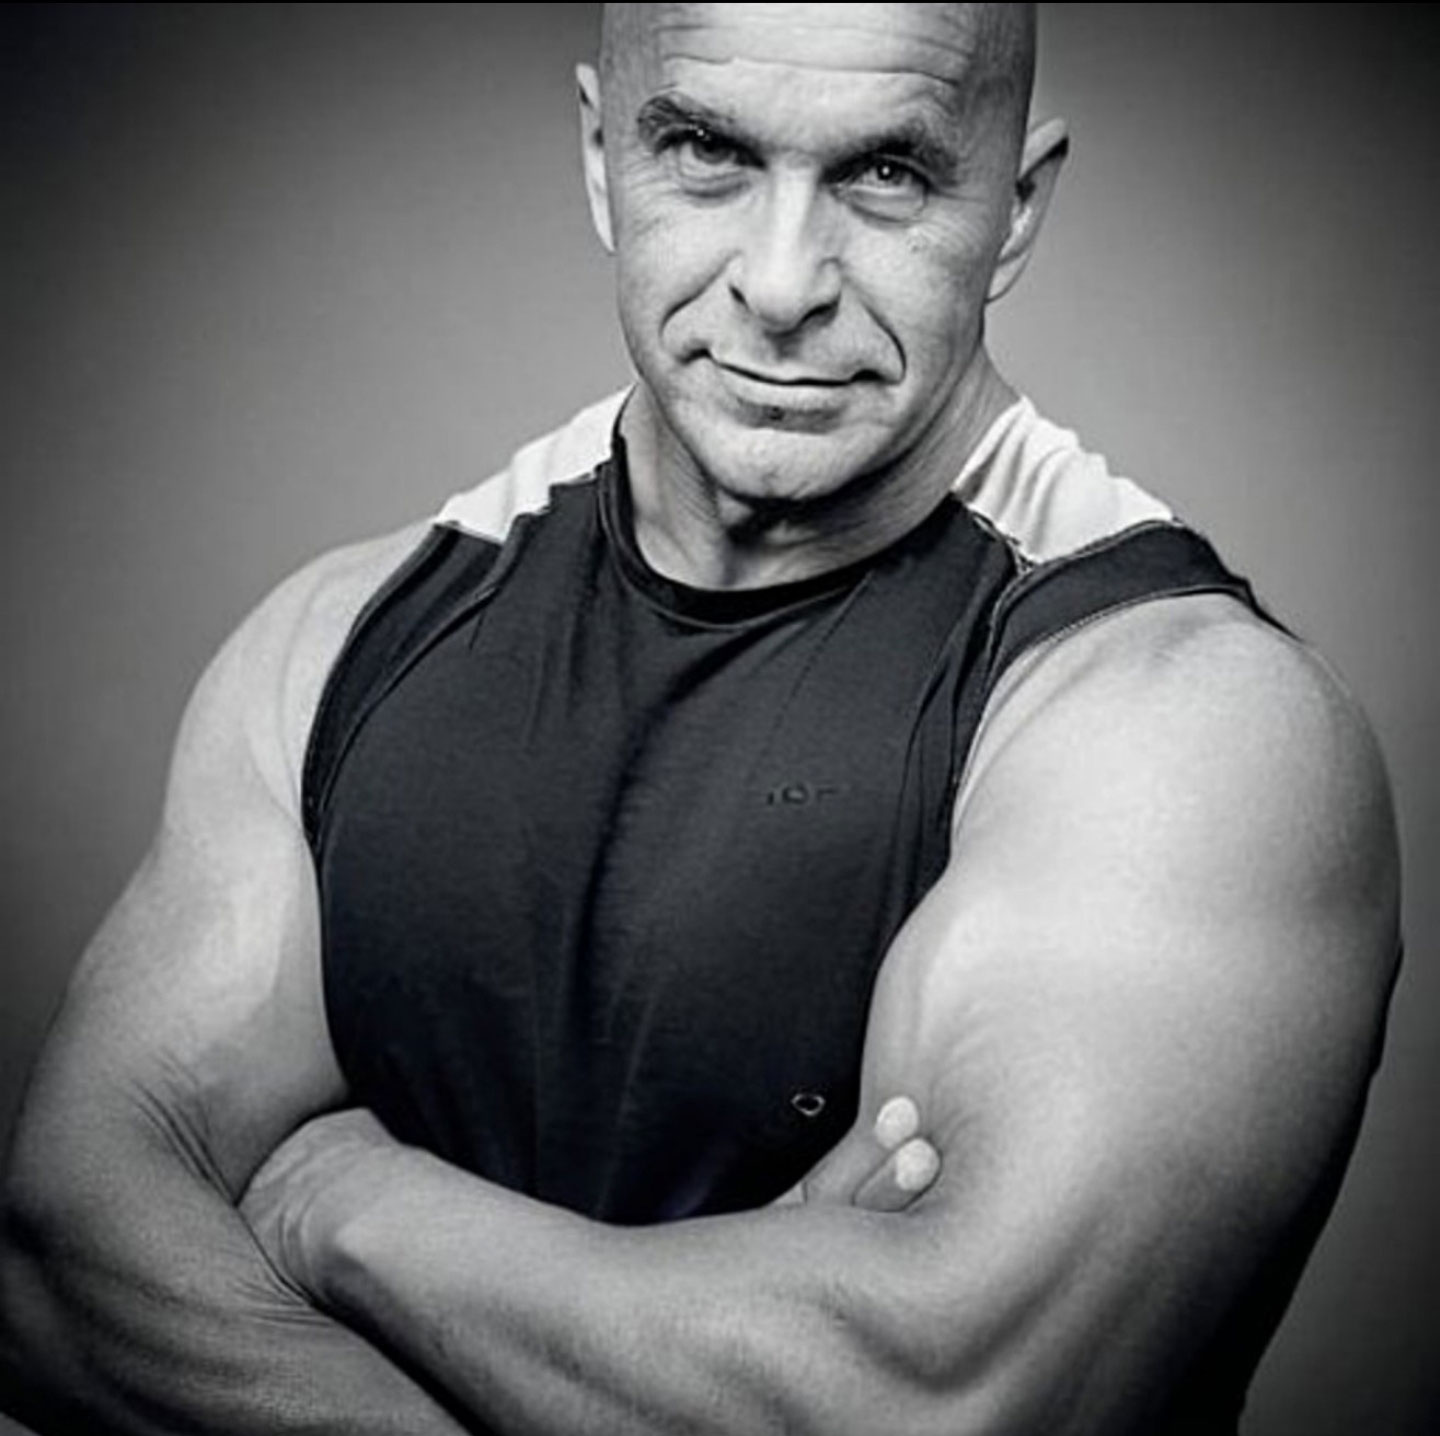 Coach posing with his muscles tightened in black and white.